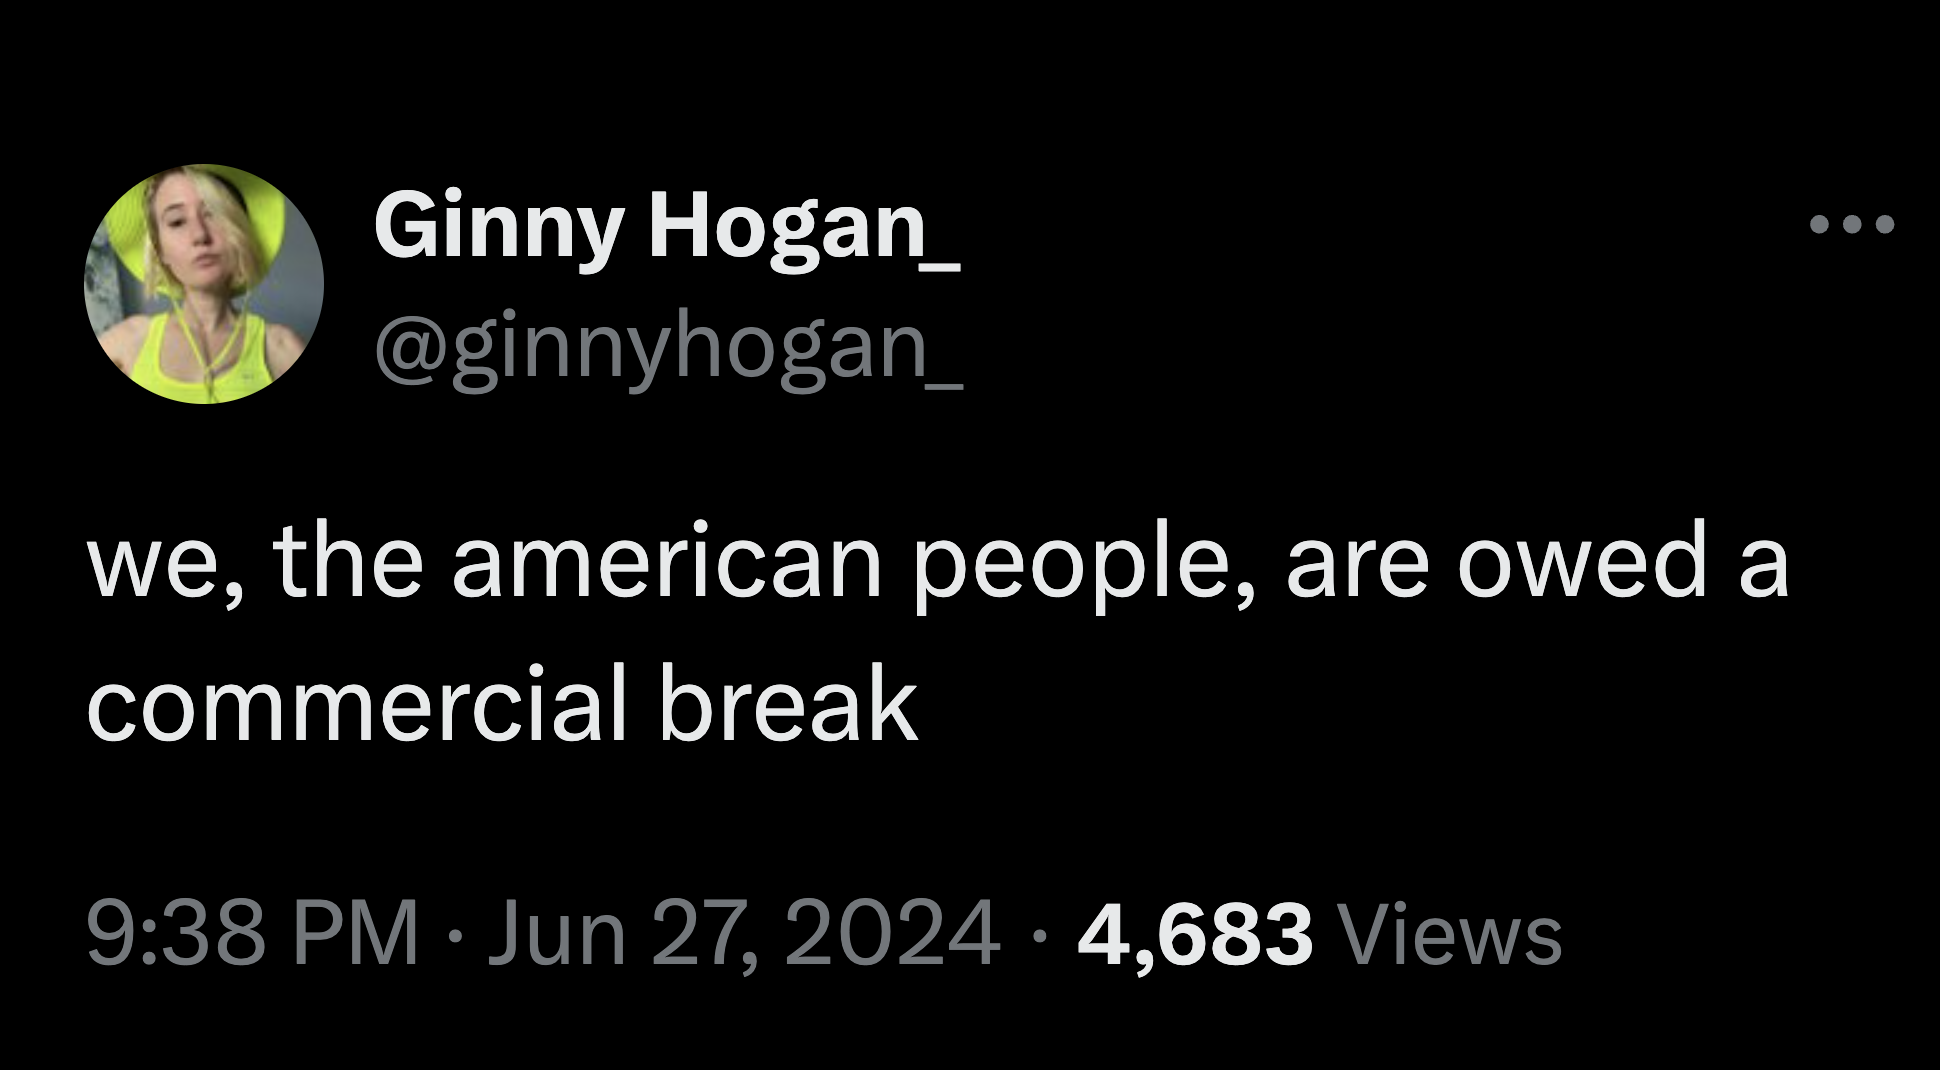 screenshot - Ginny Hogan_ we, the american people, are owed a commercial break 4,683 Views